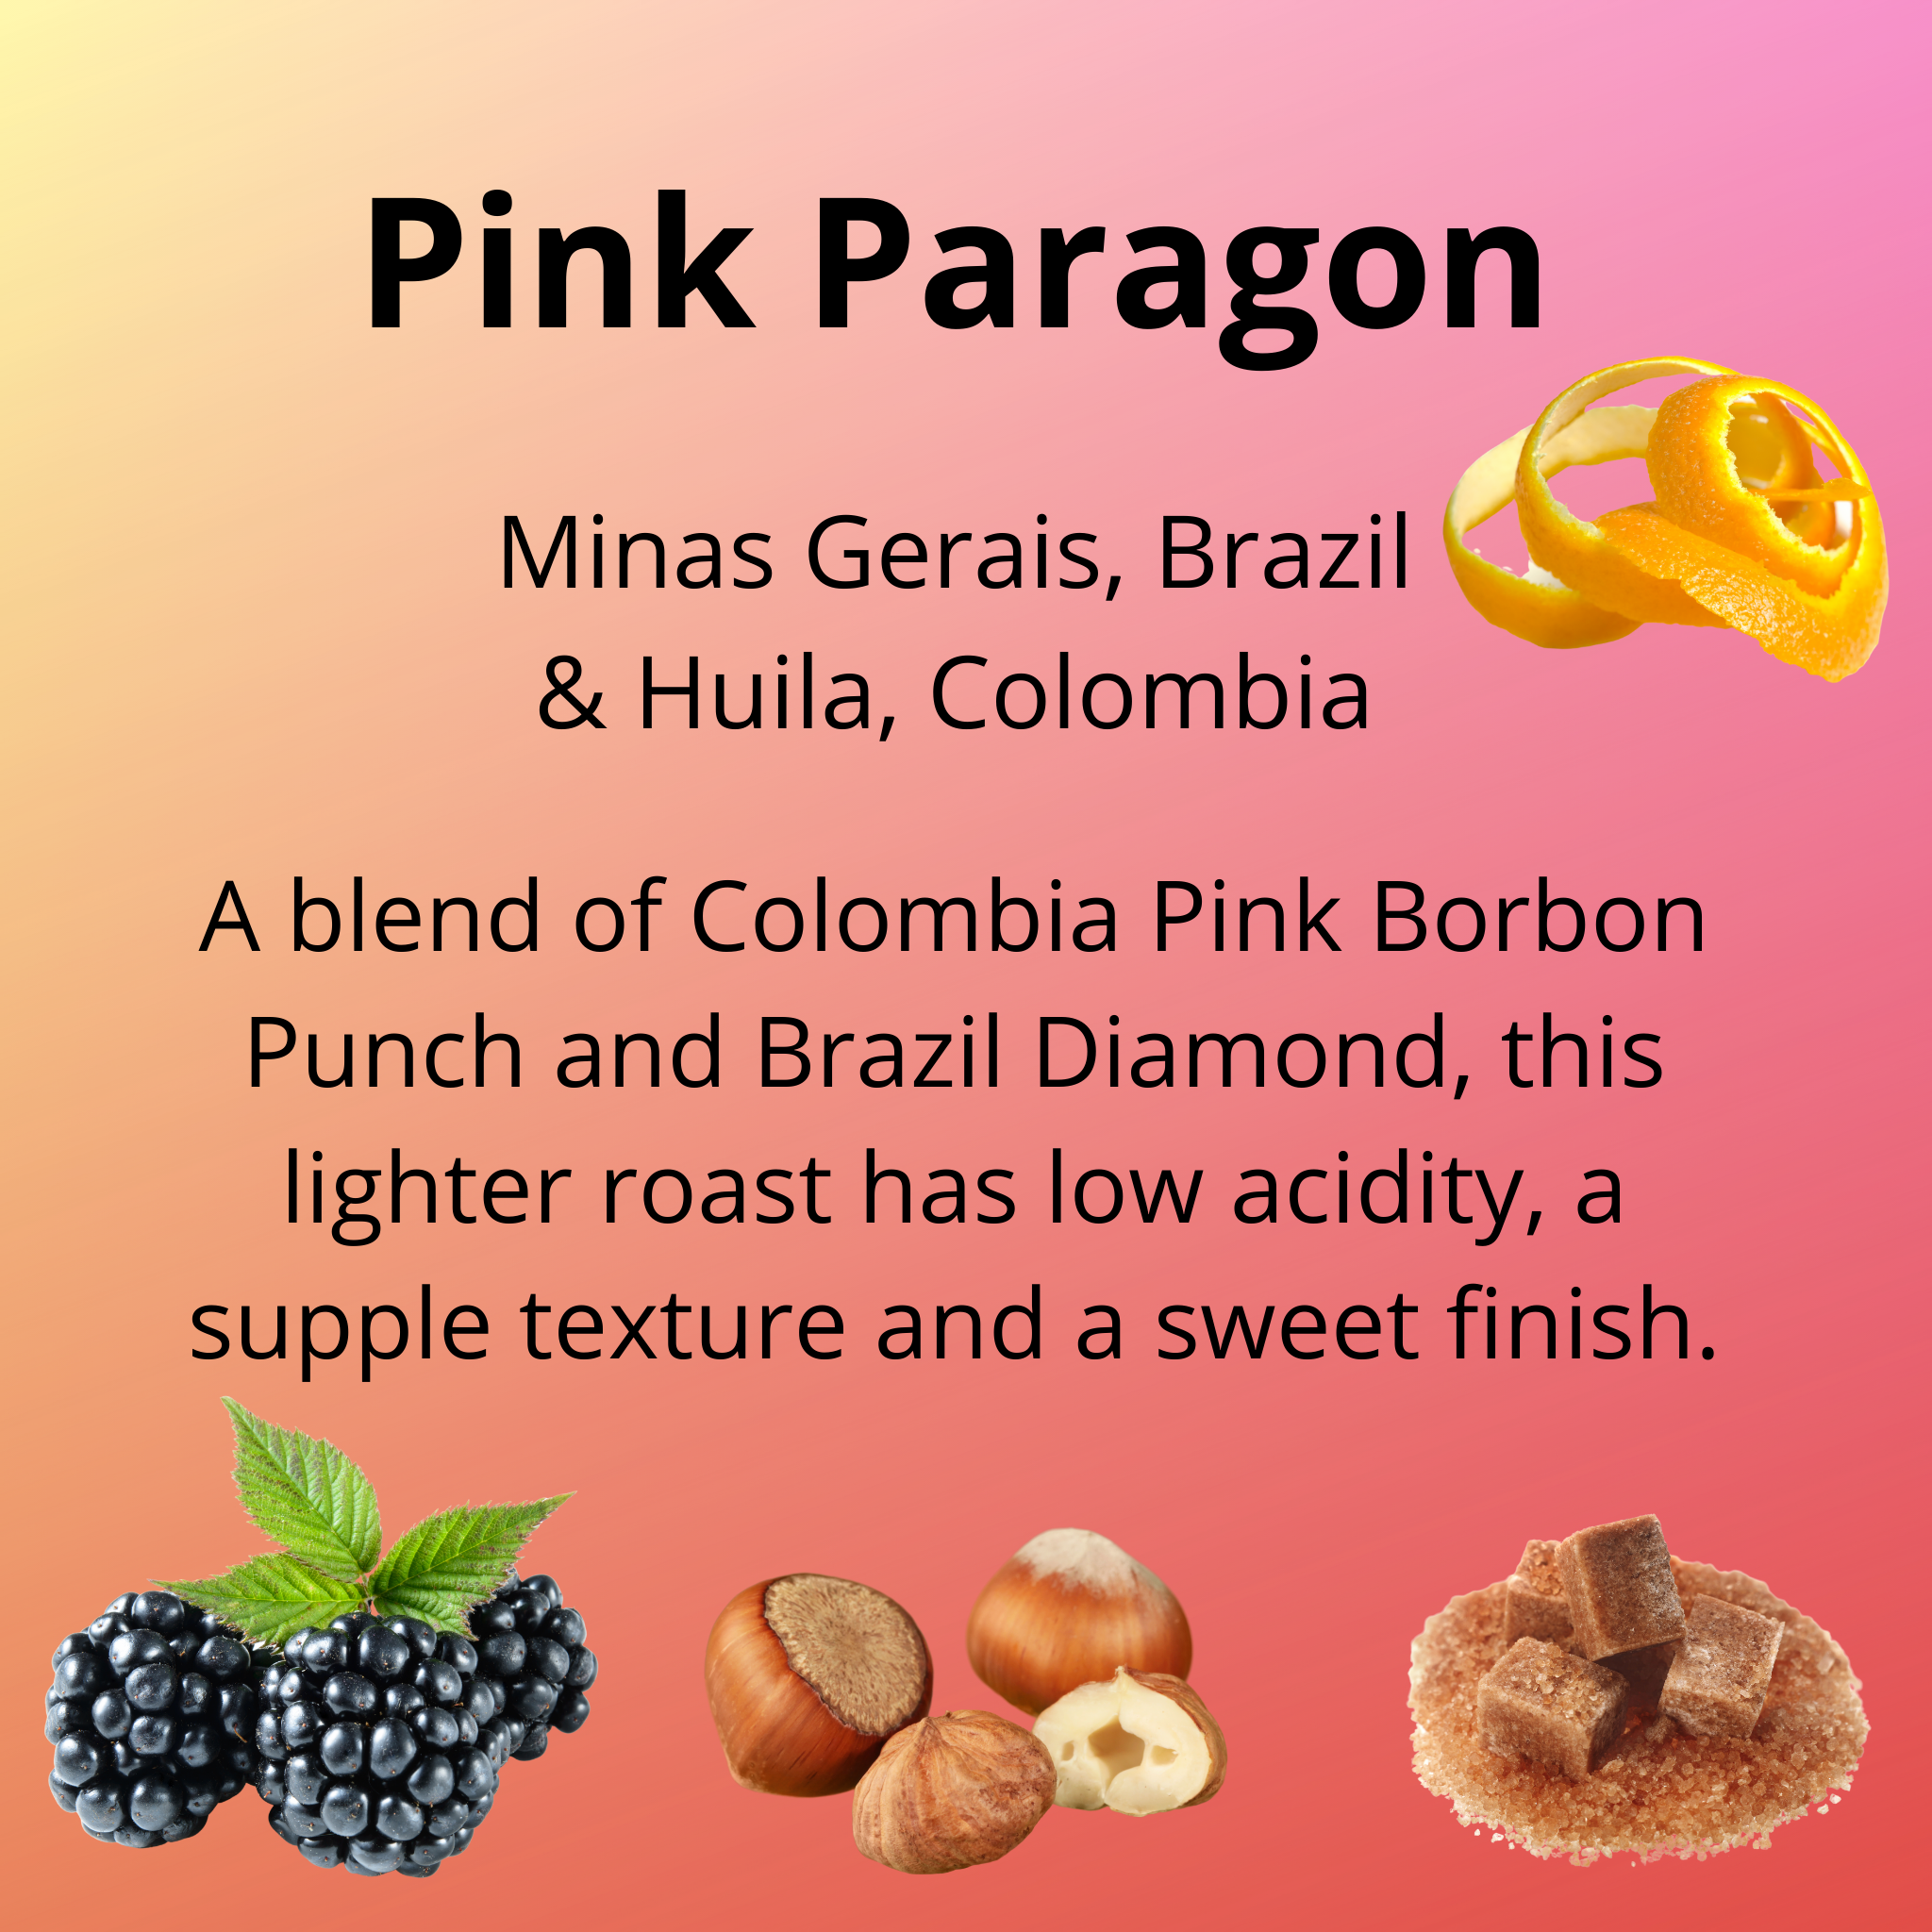 Pink Paragon is a blend of Colombia Pink Borbon Punch and Brazil Diamond. A lighter roast with tasting notes of blackberry, hazelnut, brown sugar and orange zest, this playful blend has low acidity, a supple texture and a sweet finish.